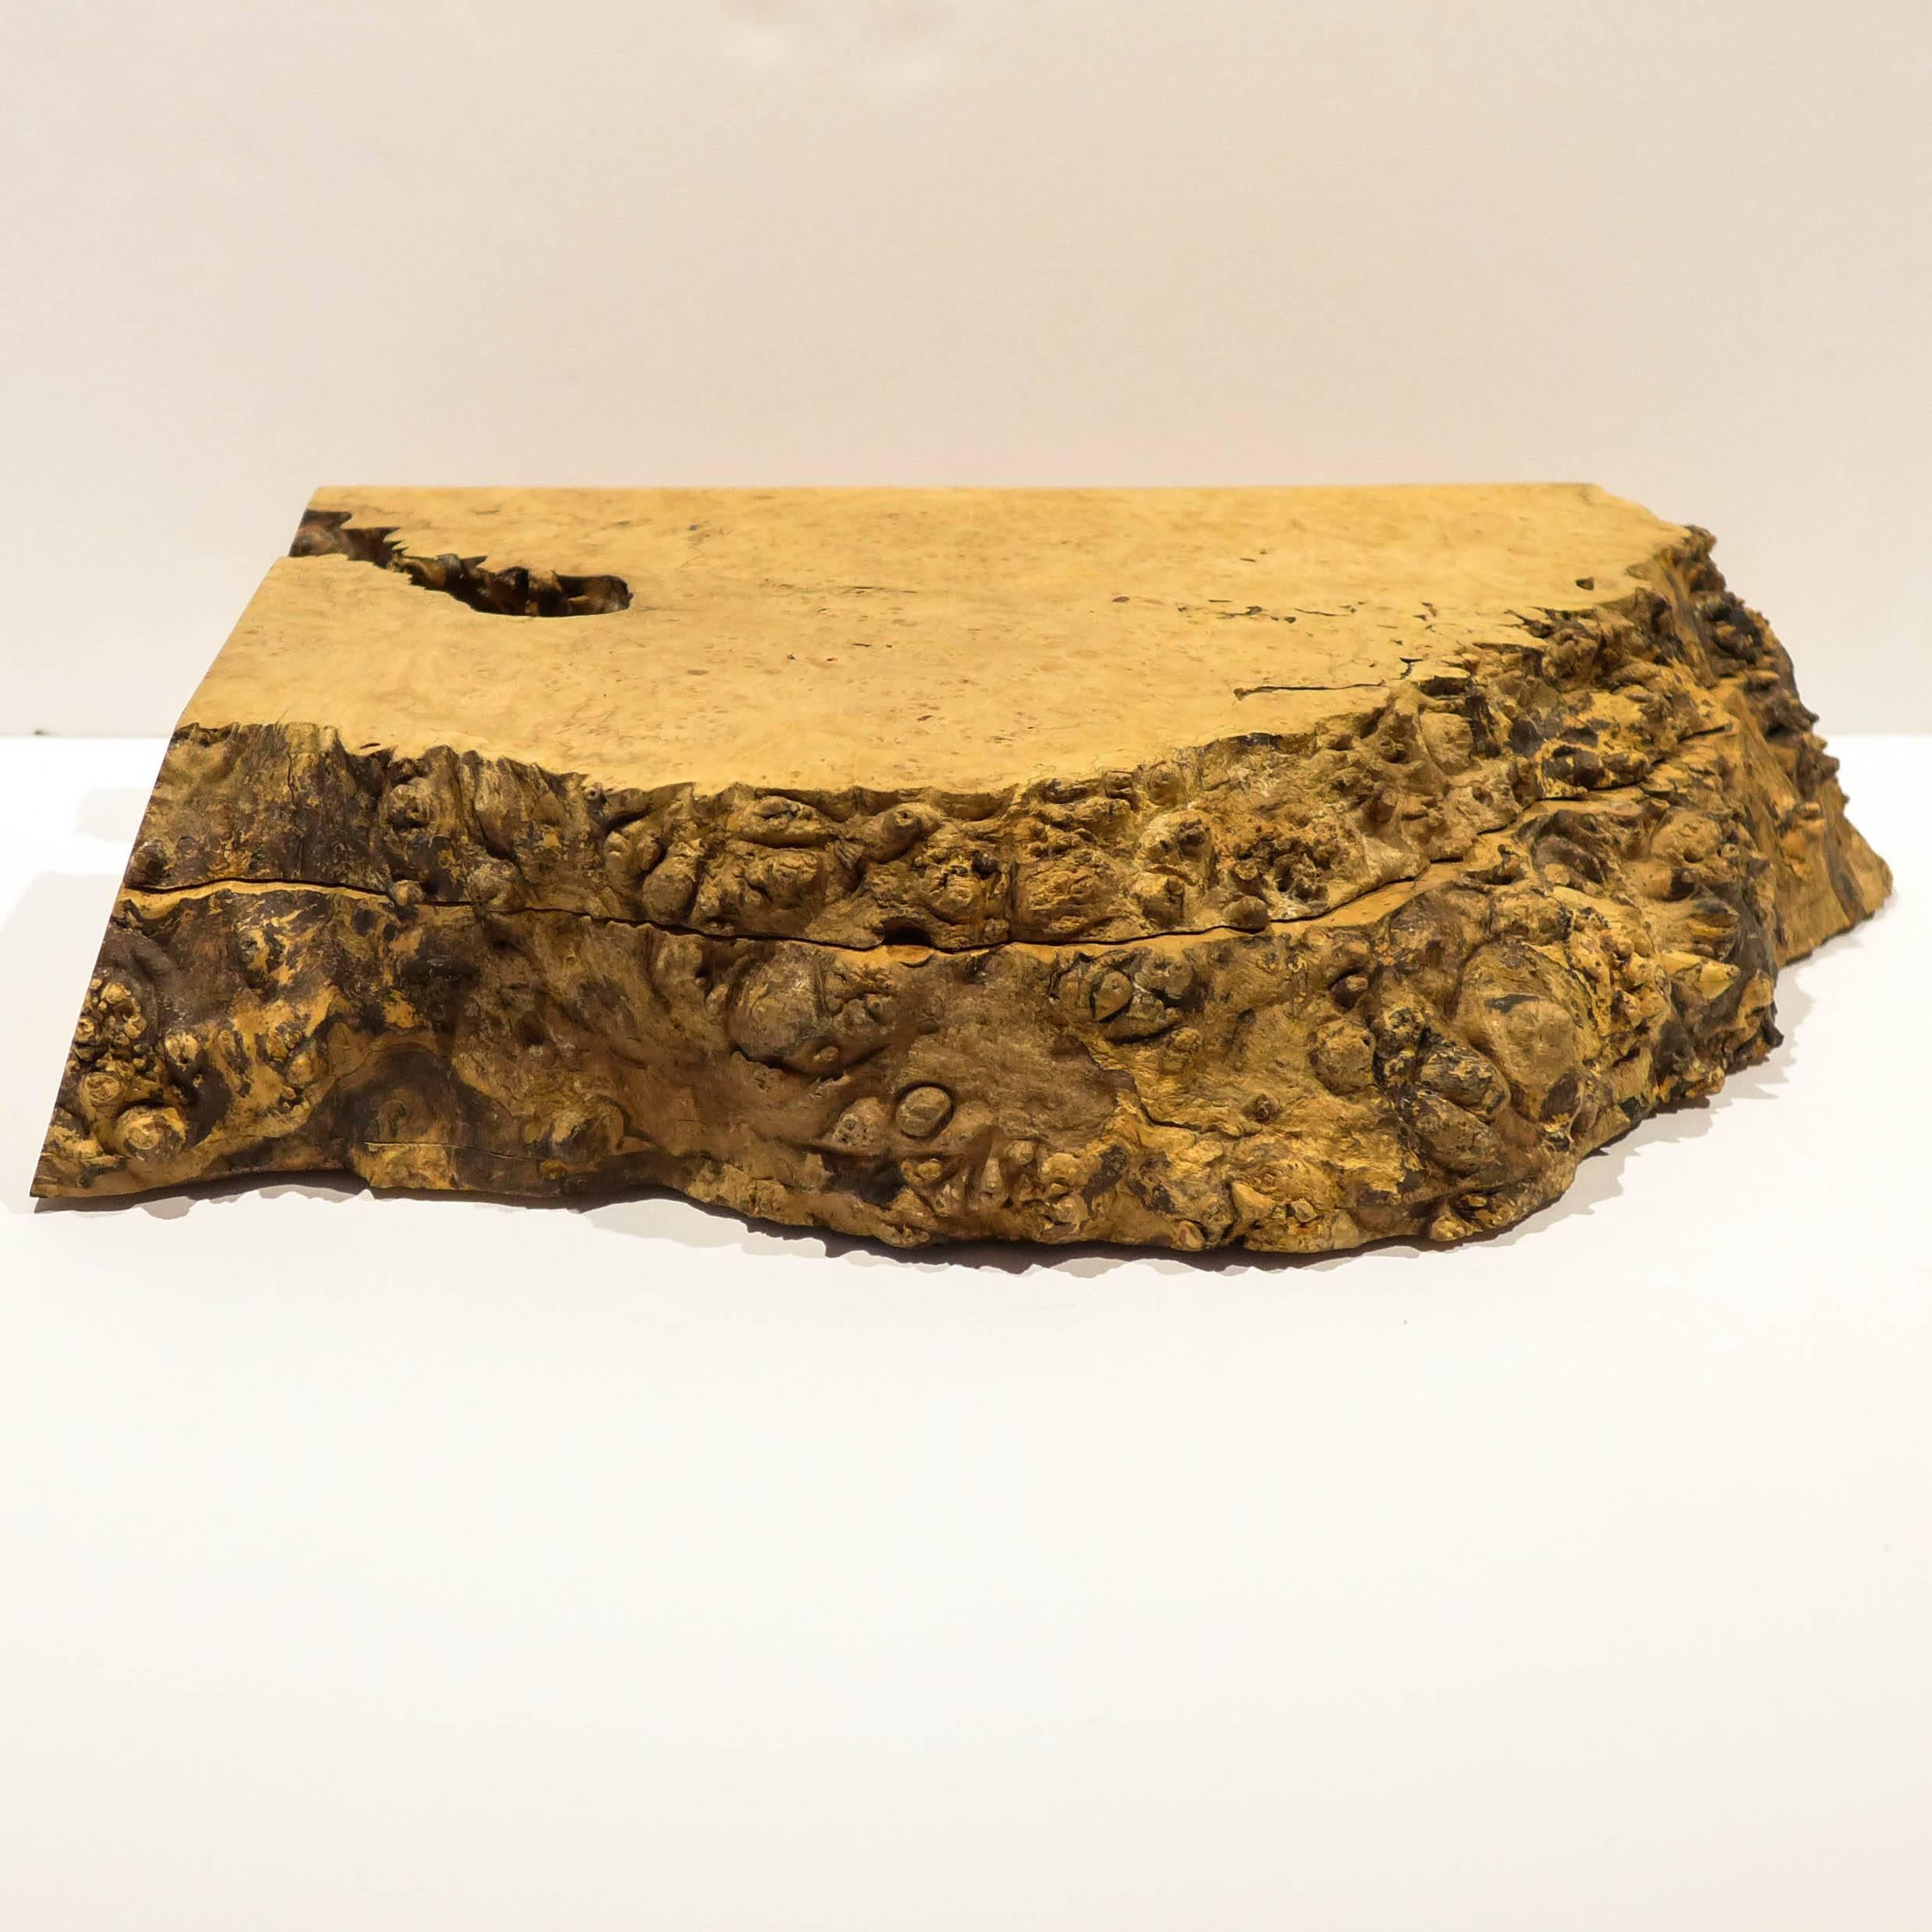 Hinged, free-edged box of Oregon bird's-eye maple burl, with segmented interior, by master woodworker Michael Elkan. Elkan opened his Oregon studio in 1980 and created wooden furniture and accessories until turning to other pursuits in 2002. His